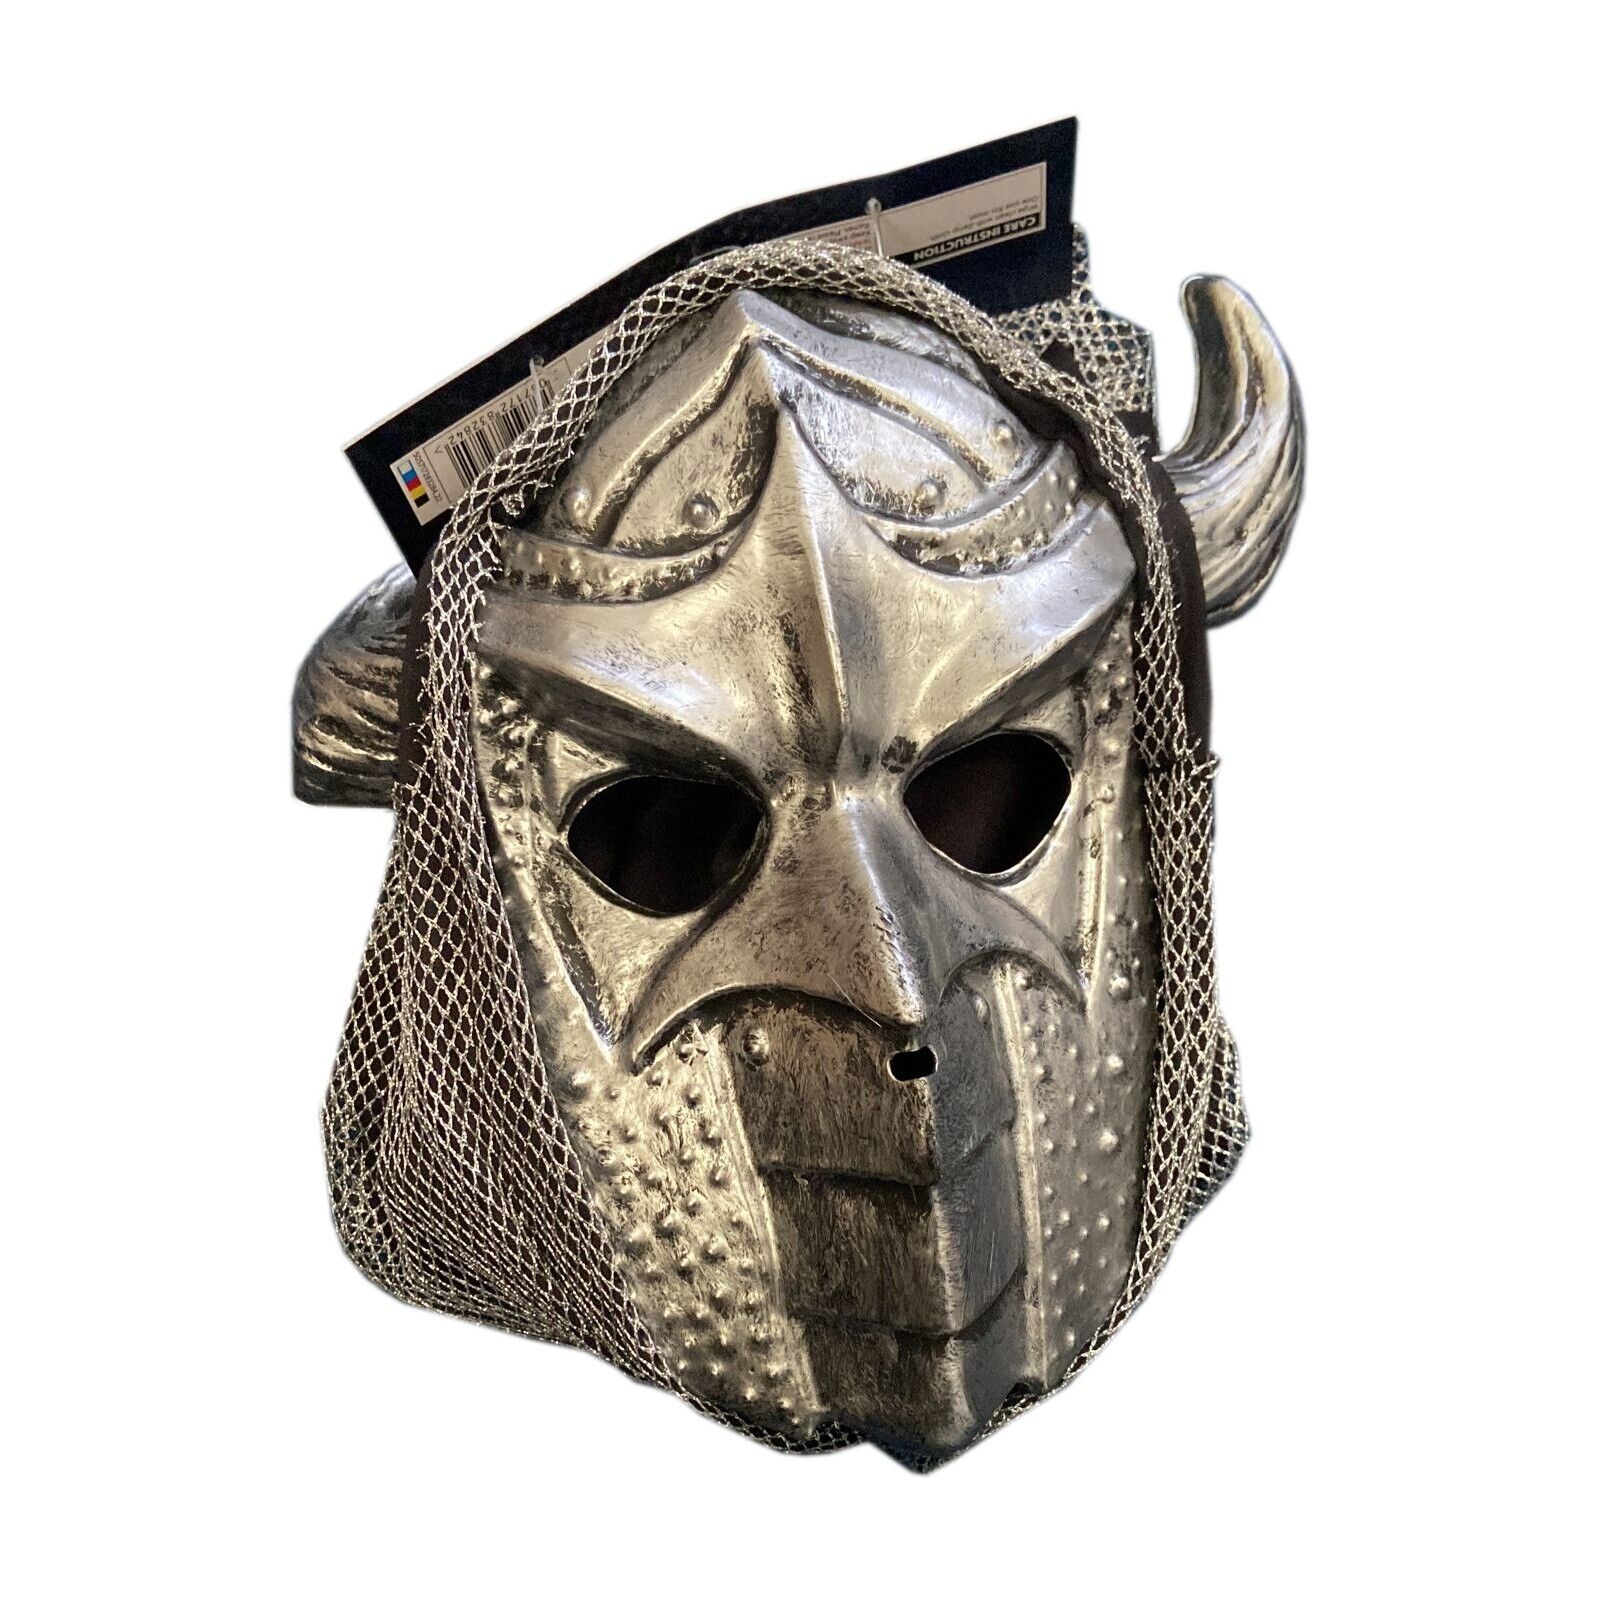 George Happy Halloween Knight Hooded Mask RRP 3.99 CLEARANCE XL 2.99